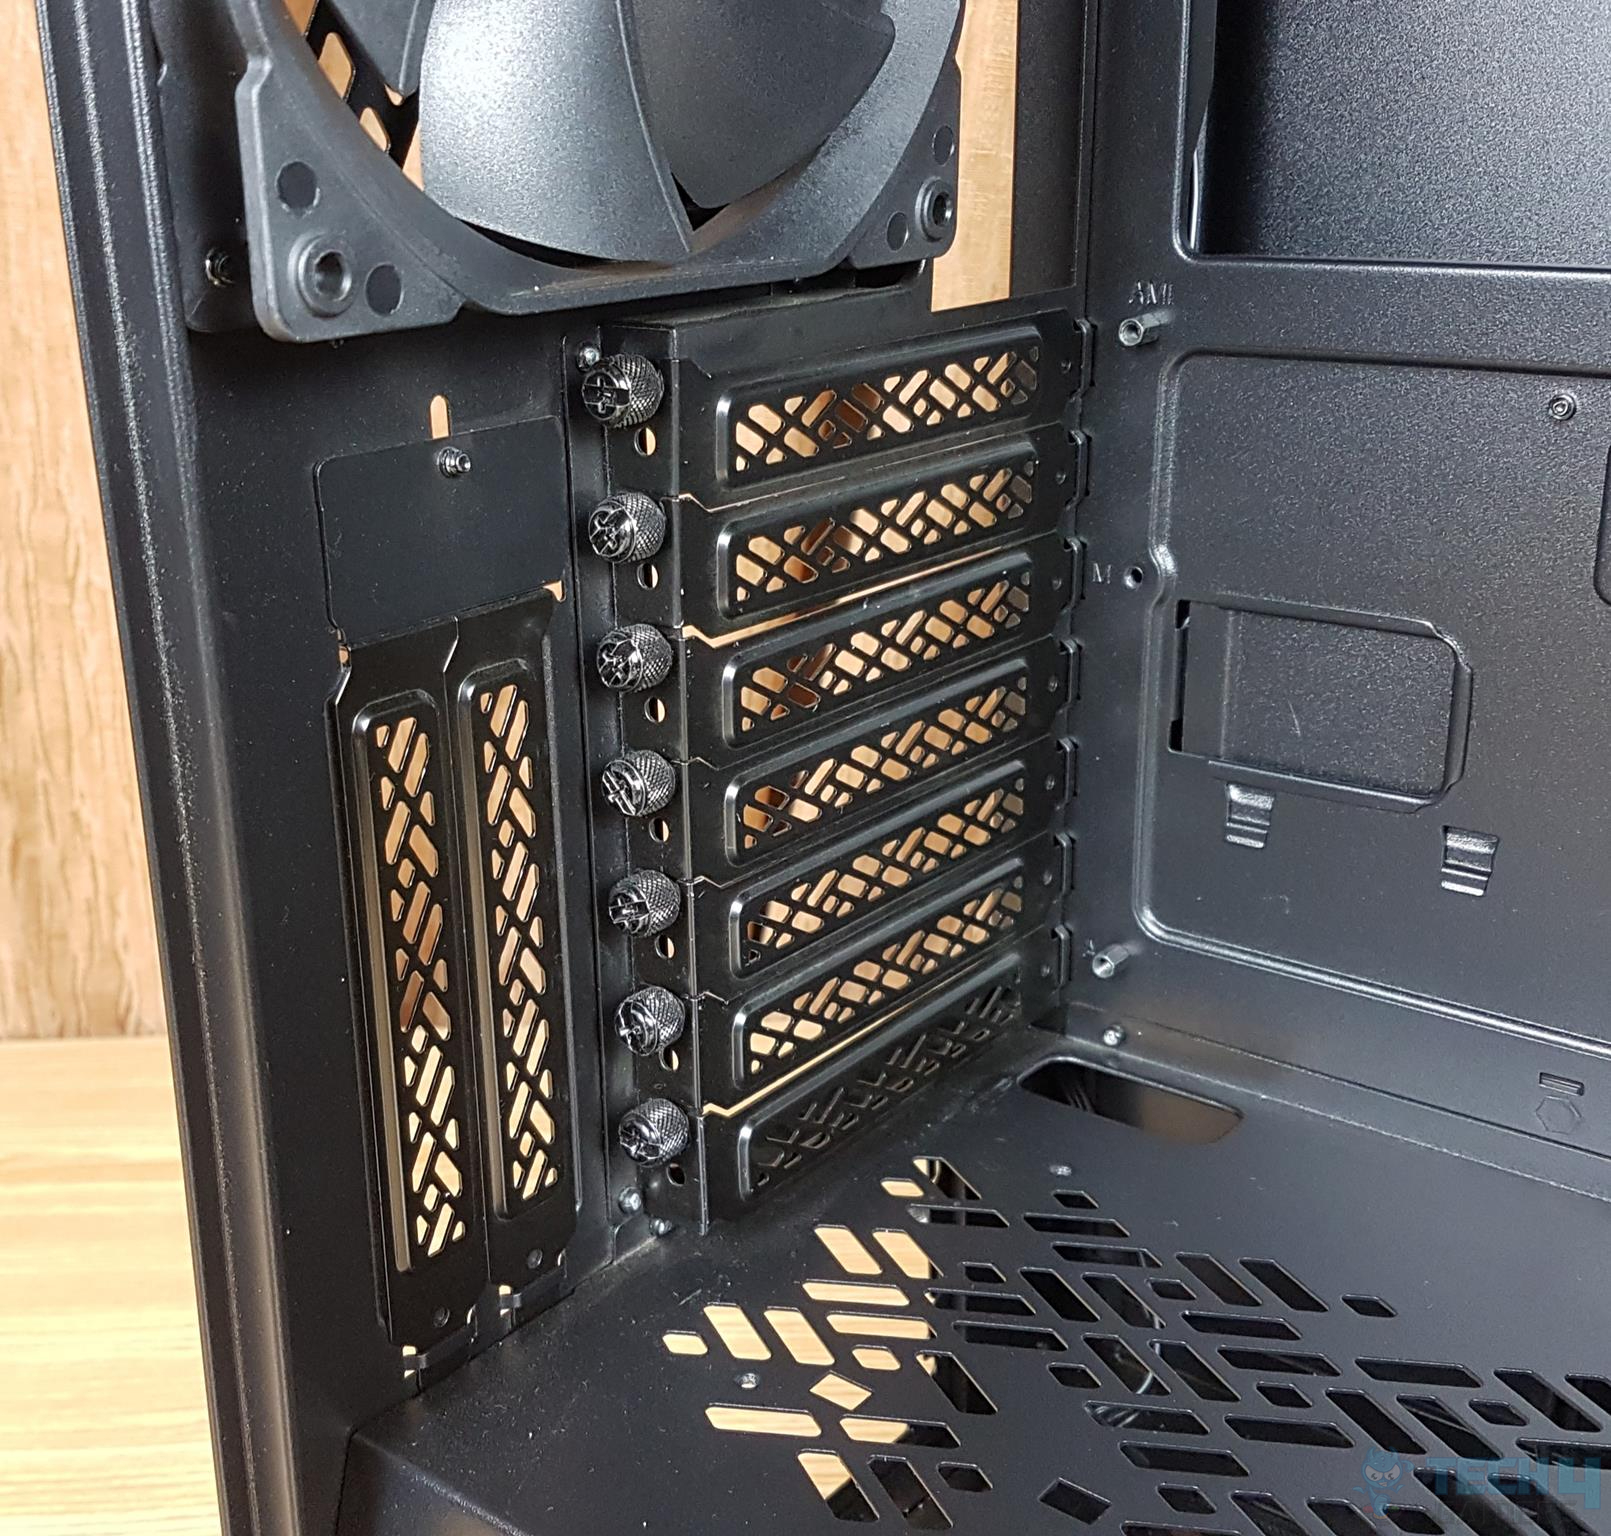 PCIe Slot Brackets (Image By Tech4Gamers)